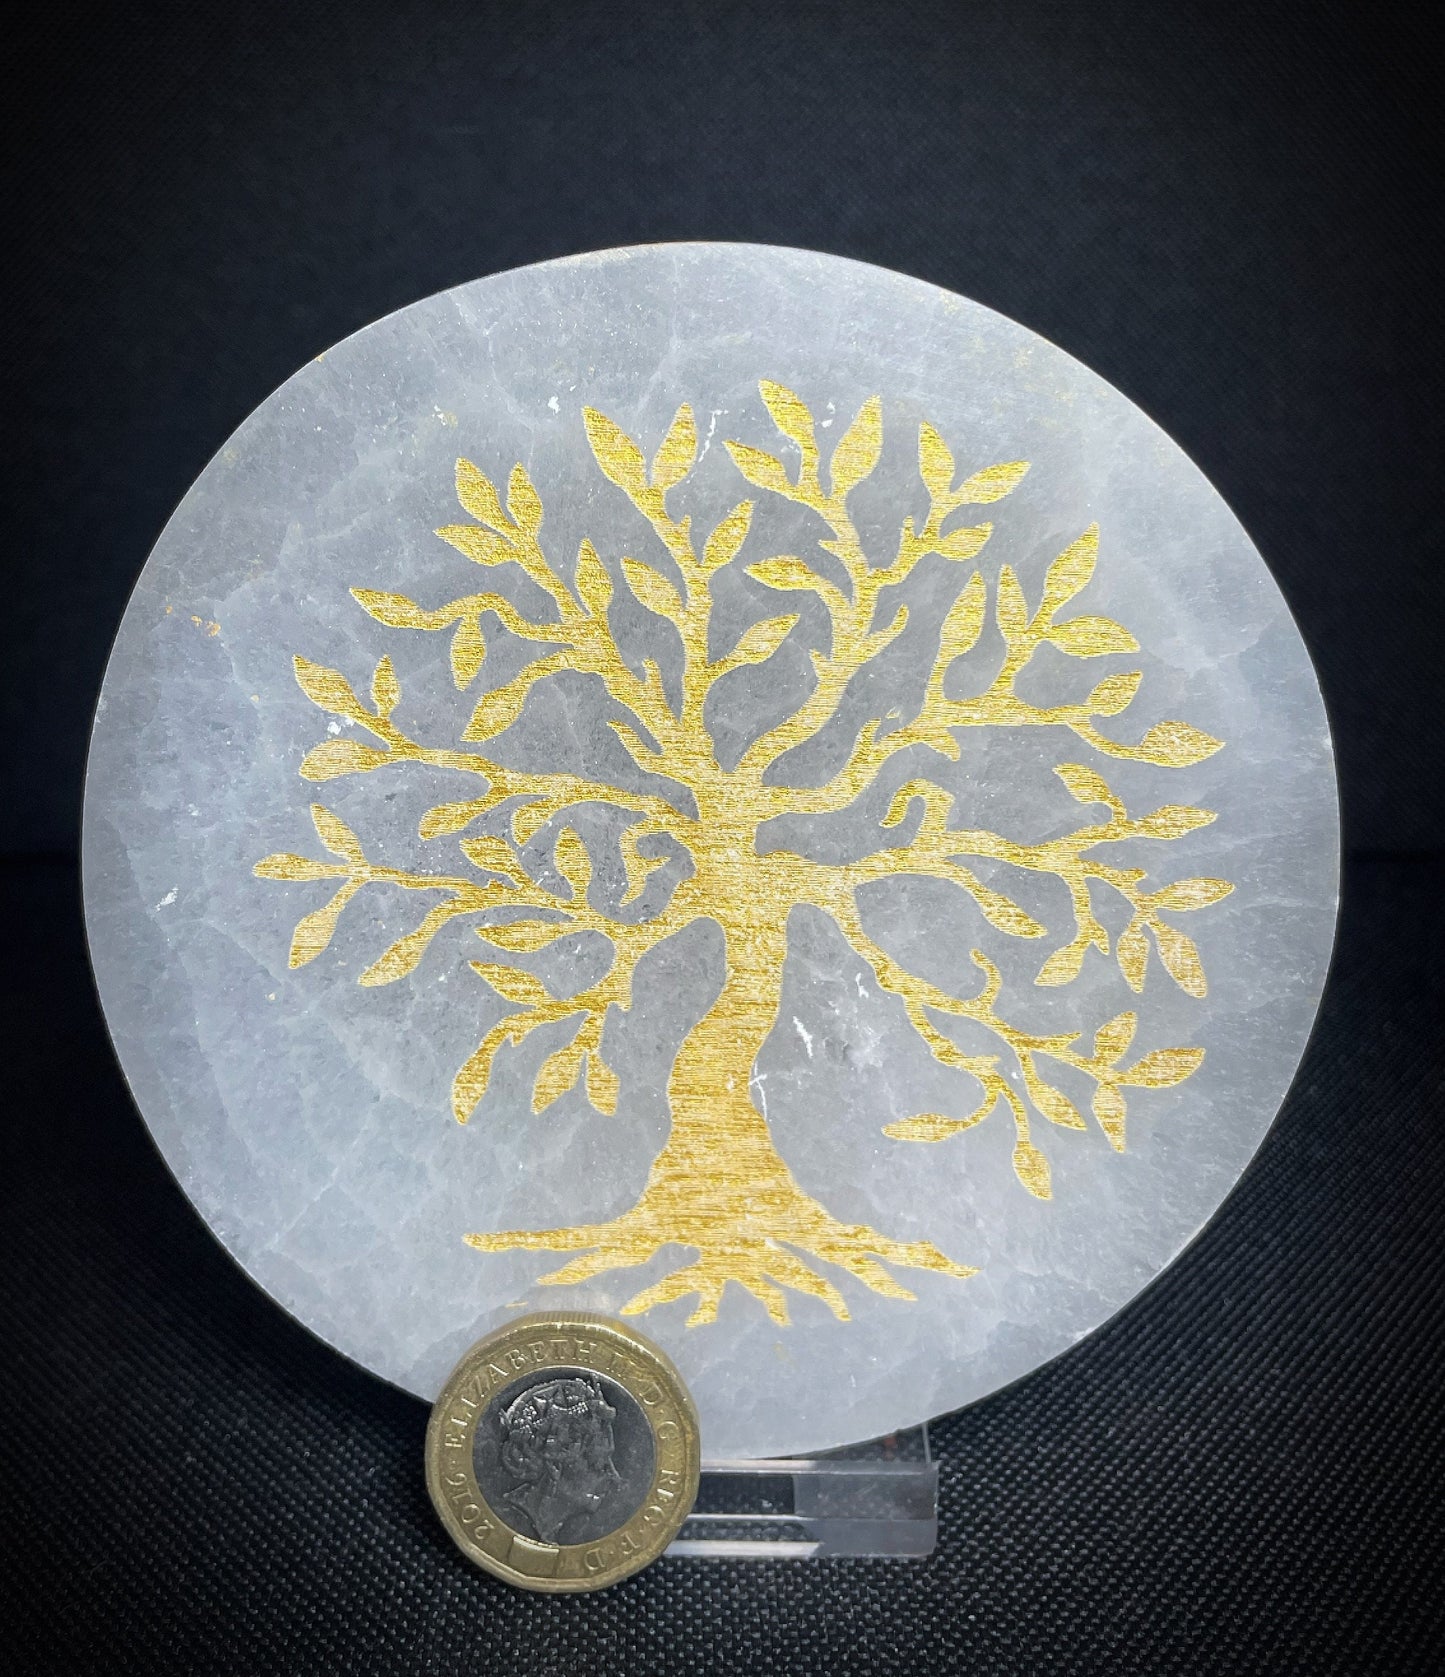 Gorgeous Selenite Tree Of Life Circle Gold Leaf Hand Crystal Charging Plate disc From Morocco